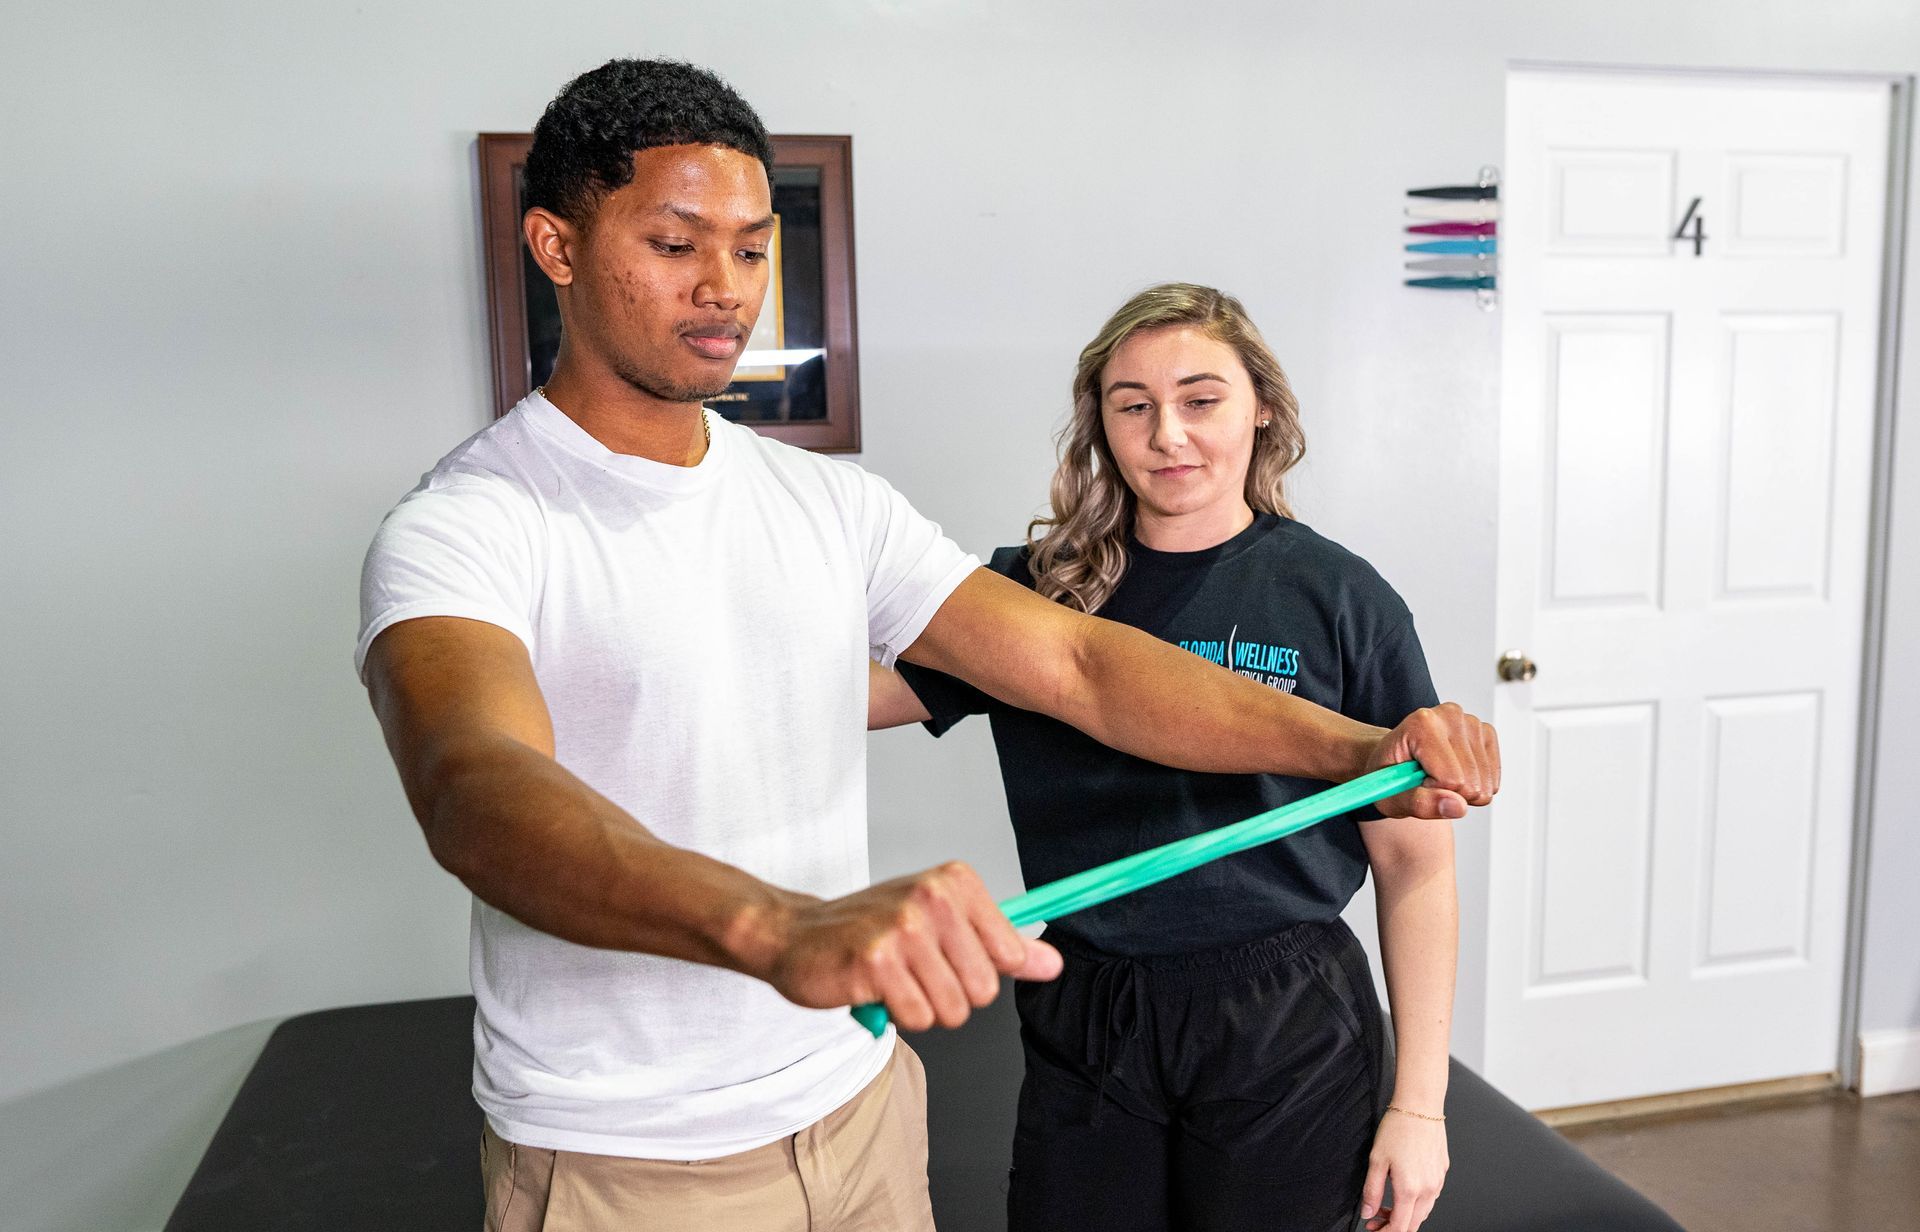 A man and a woman are doing exercises with a rubber band.